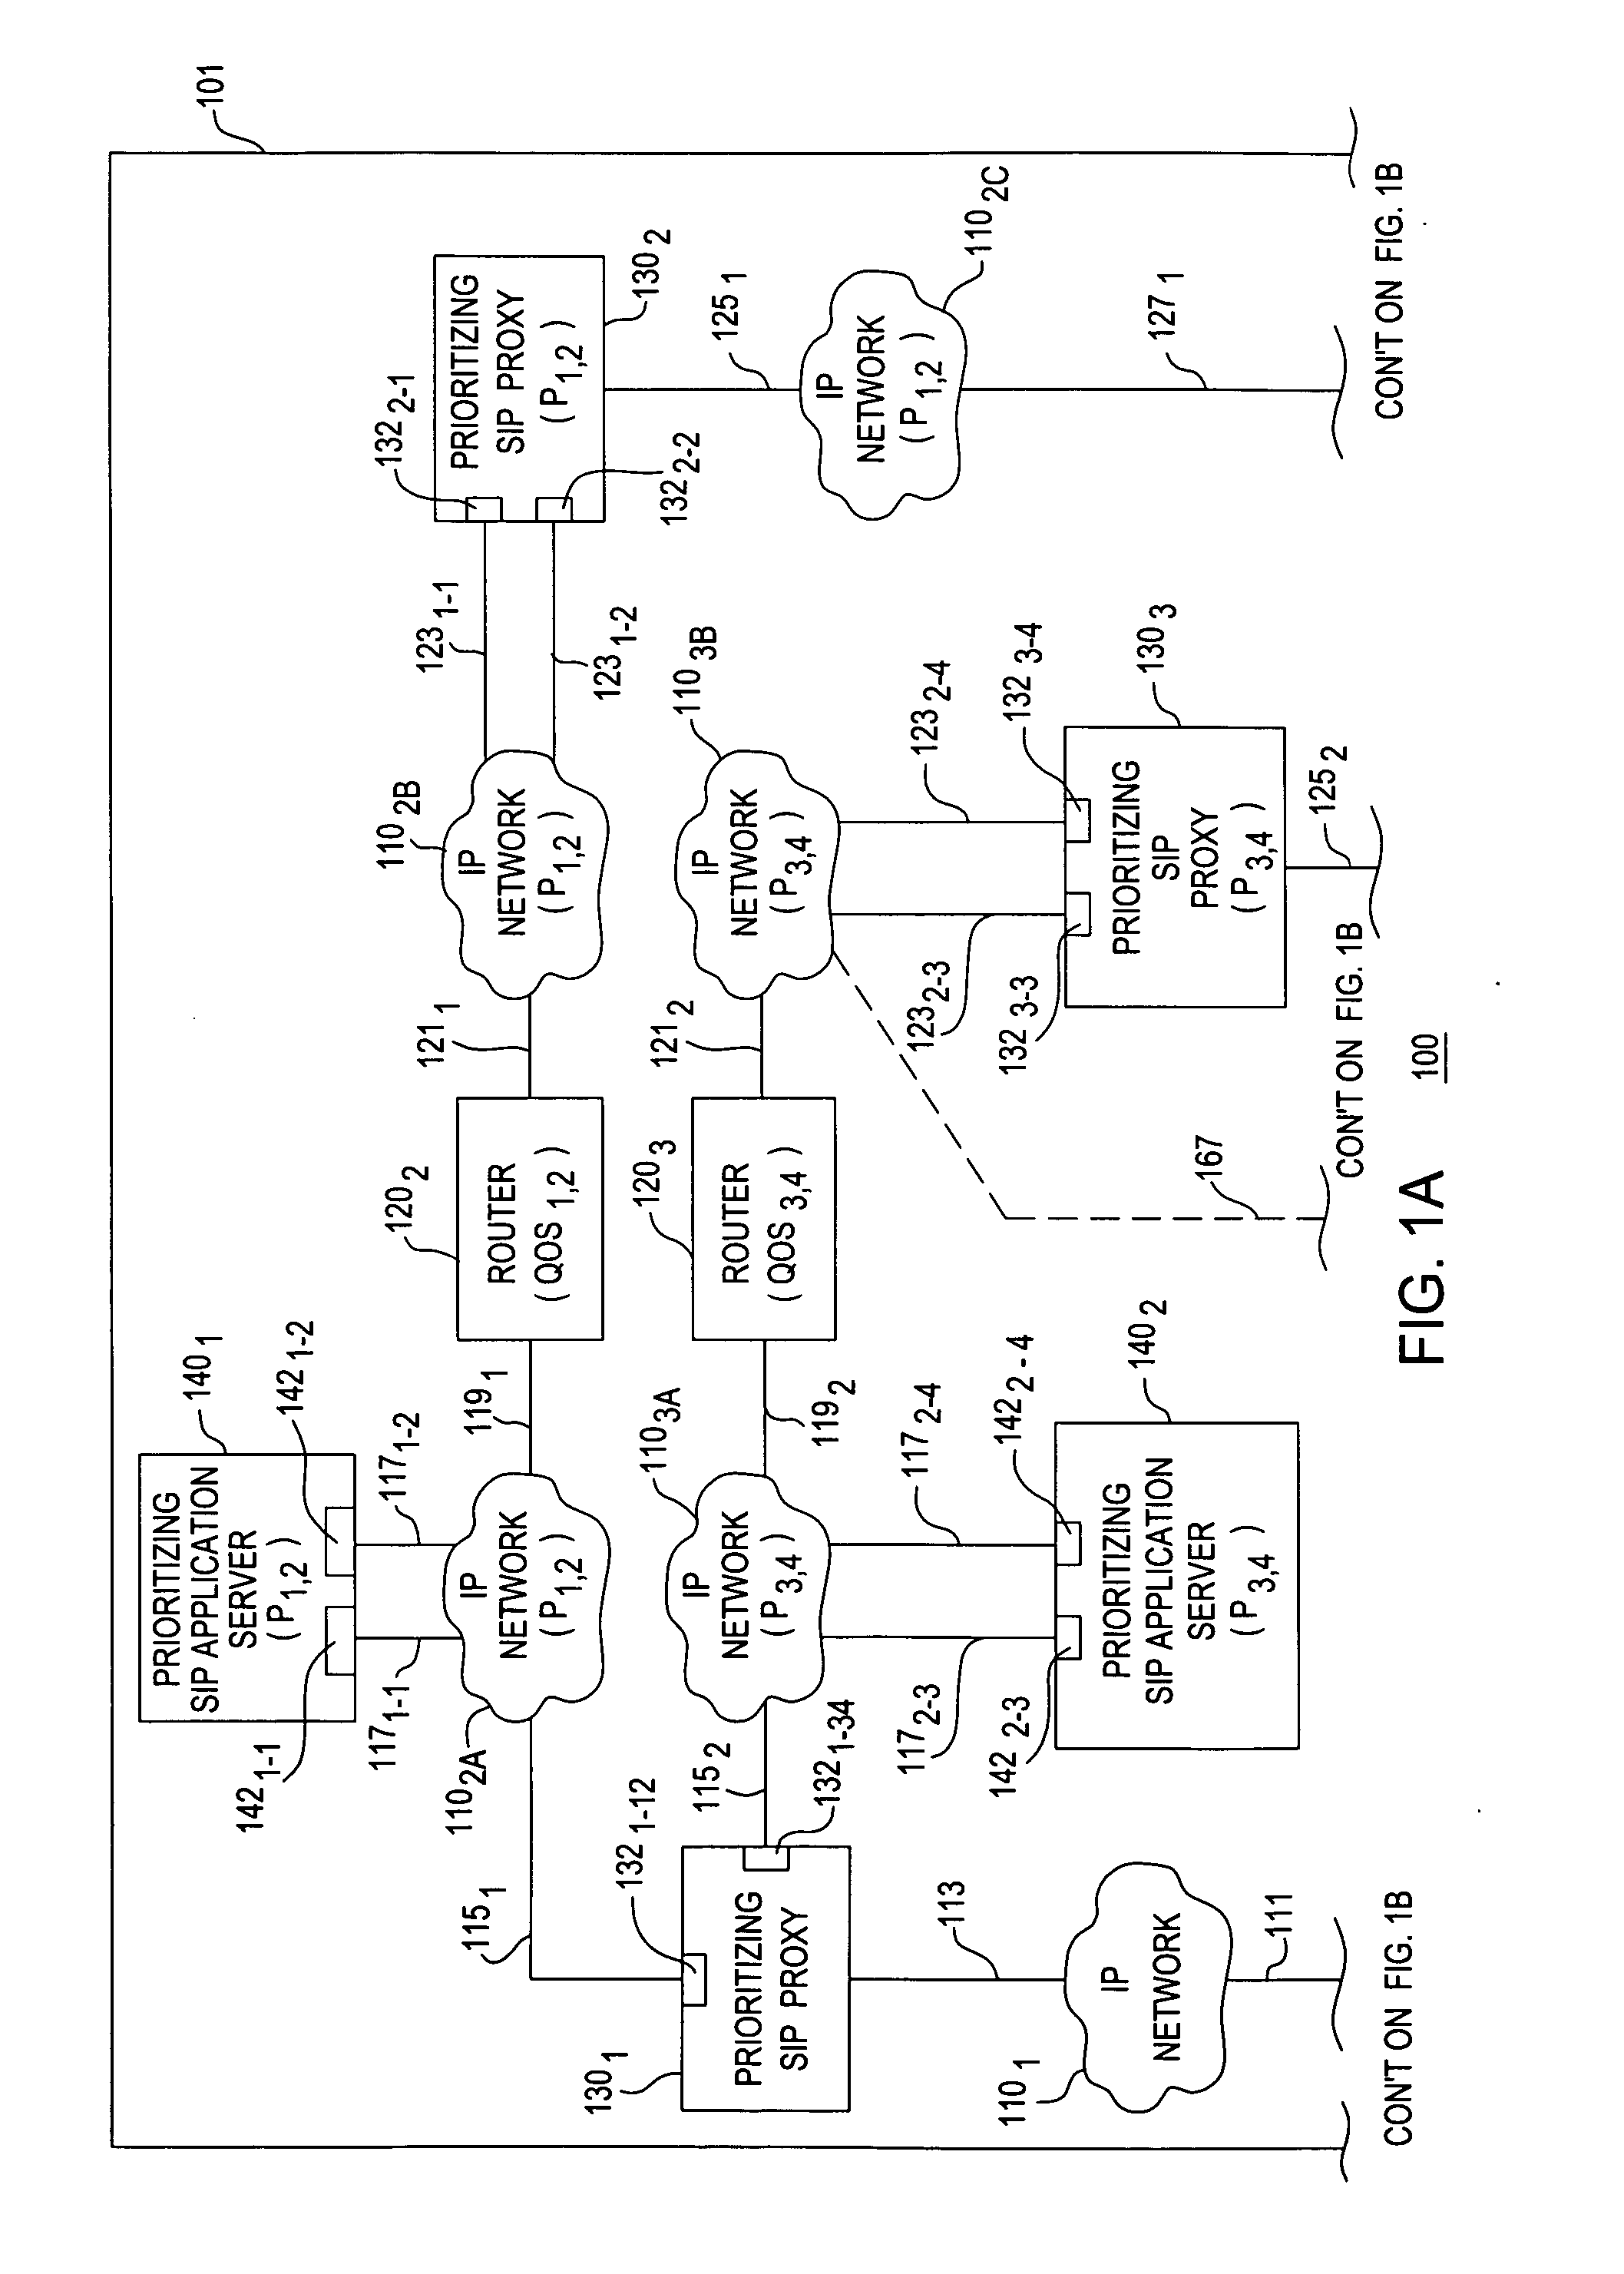 Method and apparatus for SIP message prioritization